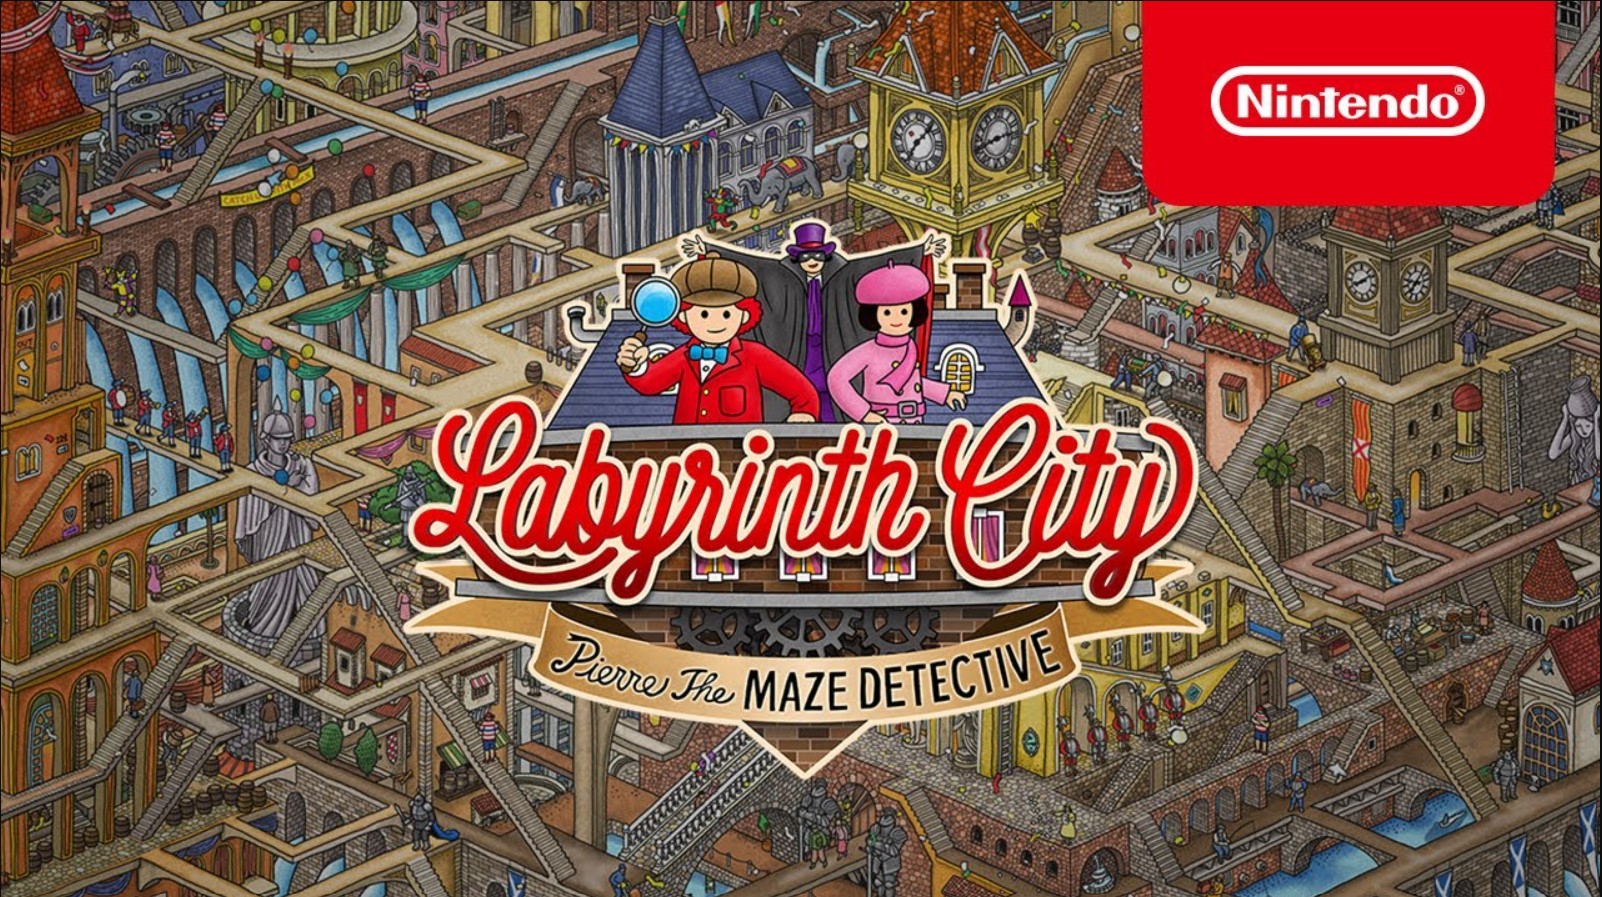 Labyrinth City Pierre the Maze Detective Pc Full Setup With Crack Download Free